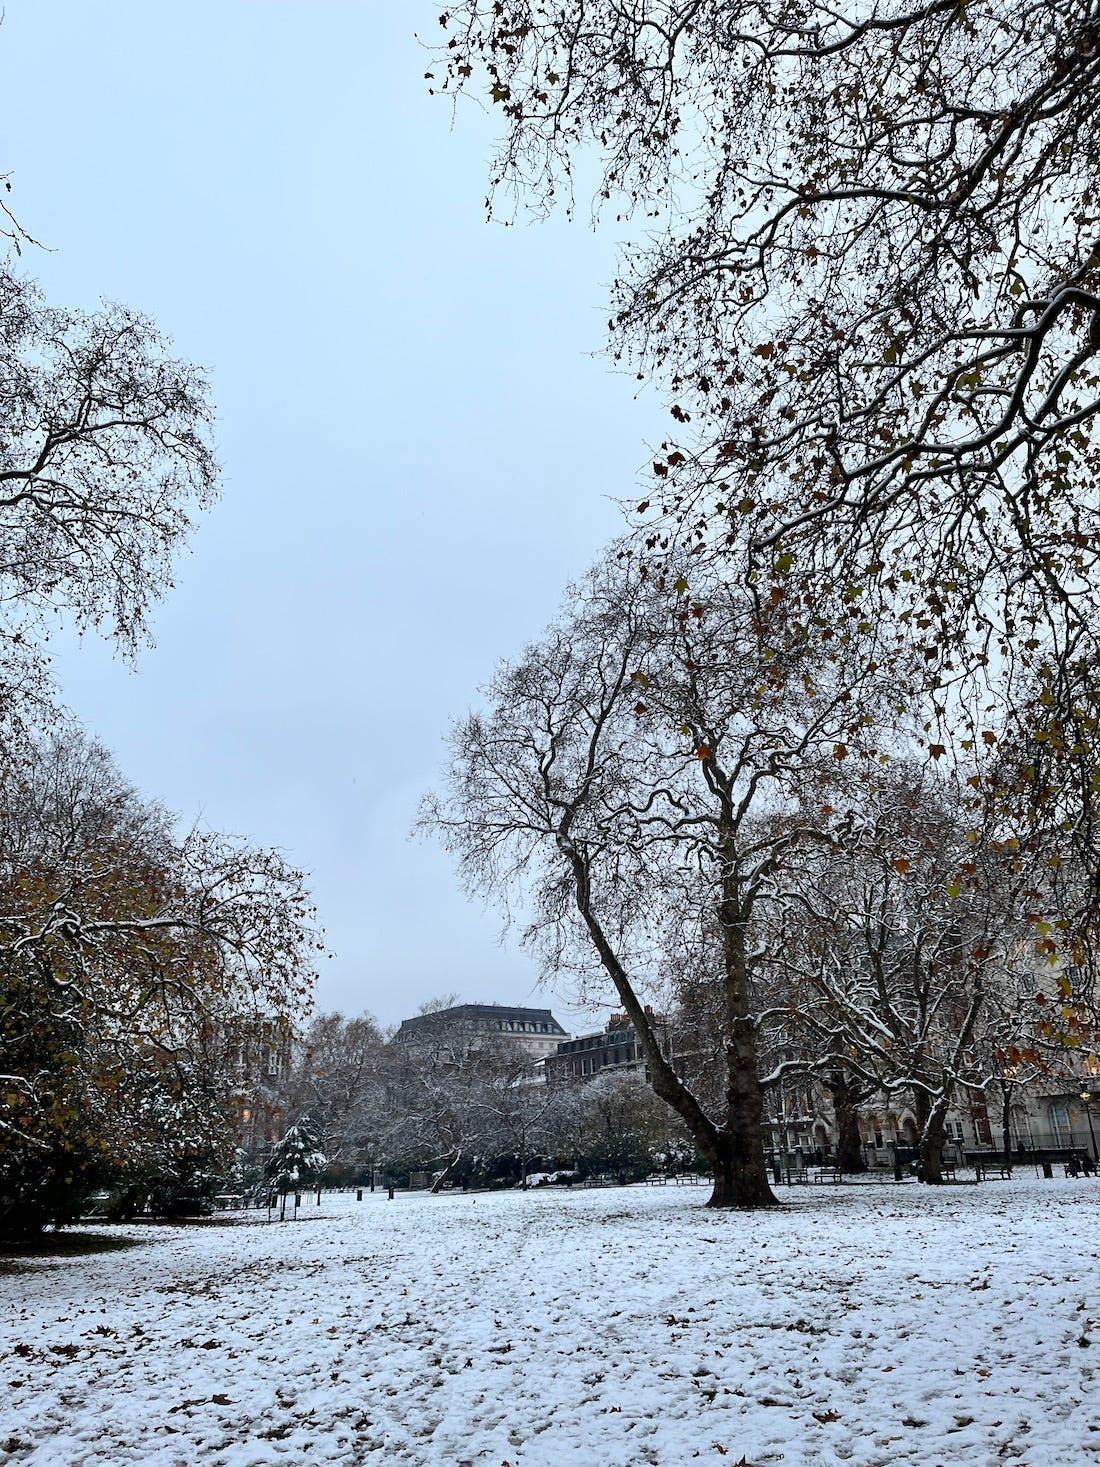 image: photo of snowy, wintry park in london